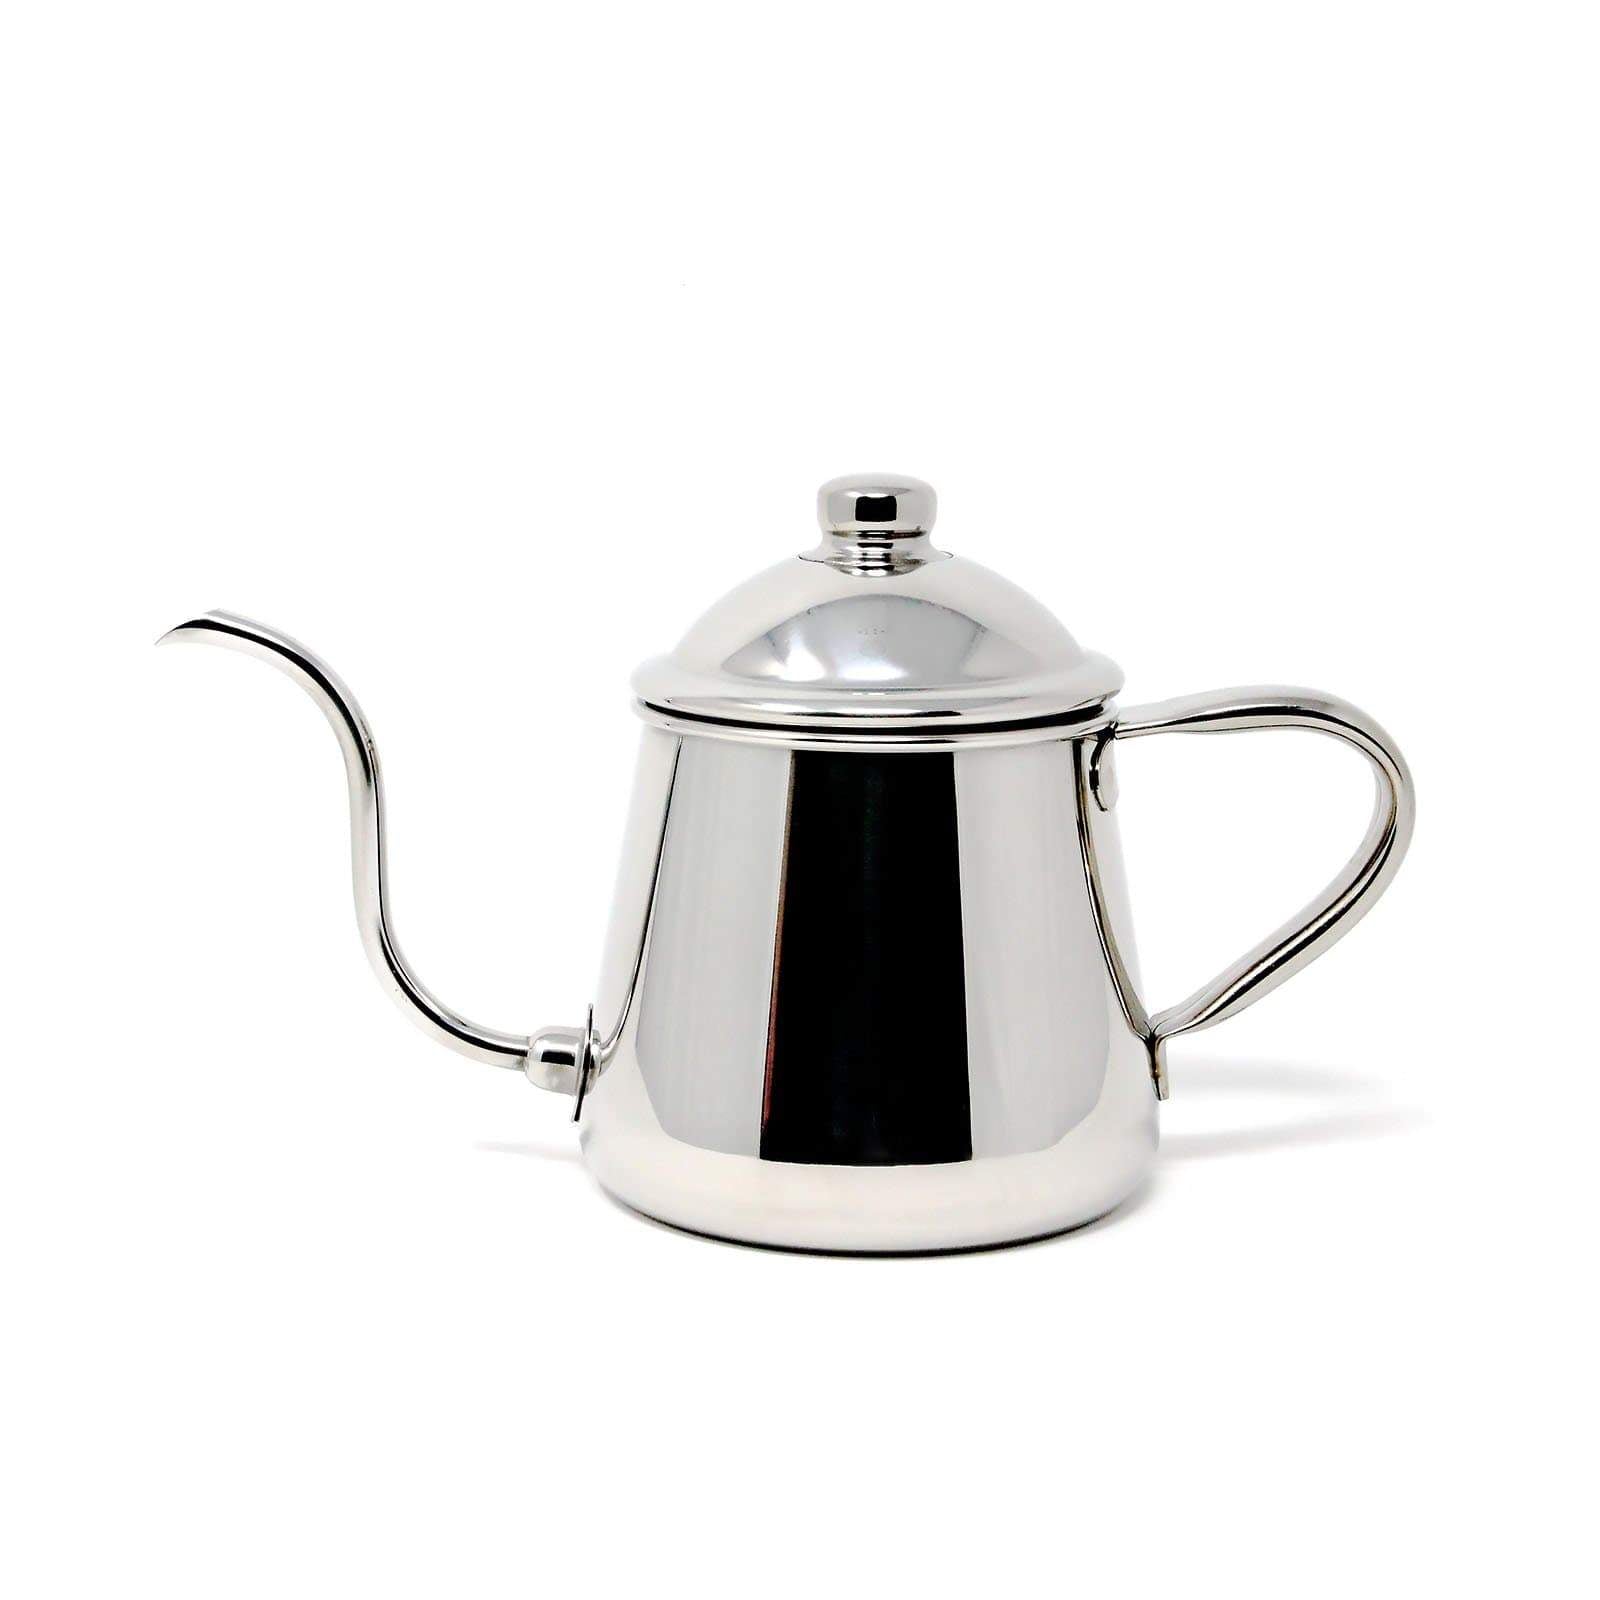 https://cdn.shopify.com/s/files/1/1610/3863/products/takahiro-shizuku-pour-over-brewing-kettle-0-5l-pour-over-kettles-6982046777427_1600x.jpg?v=1564114739